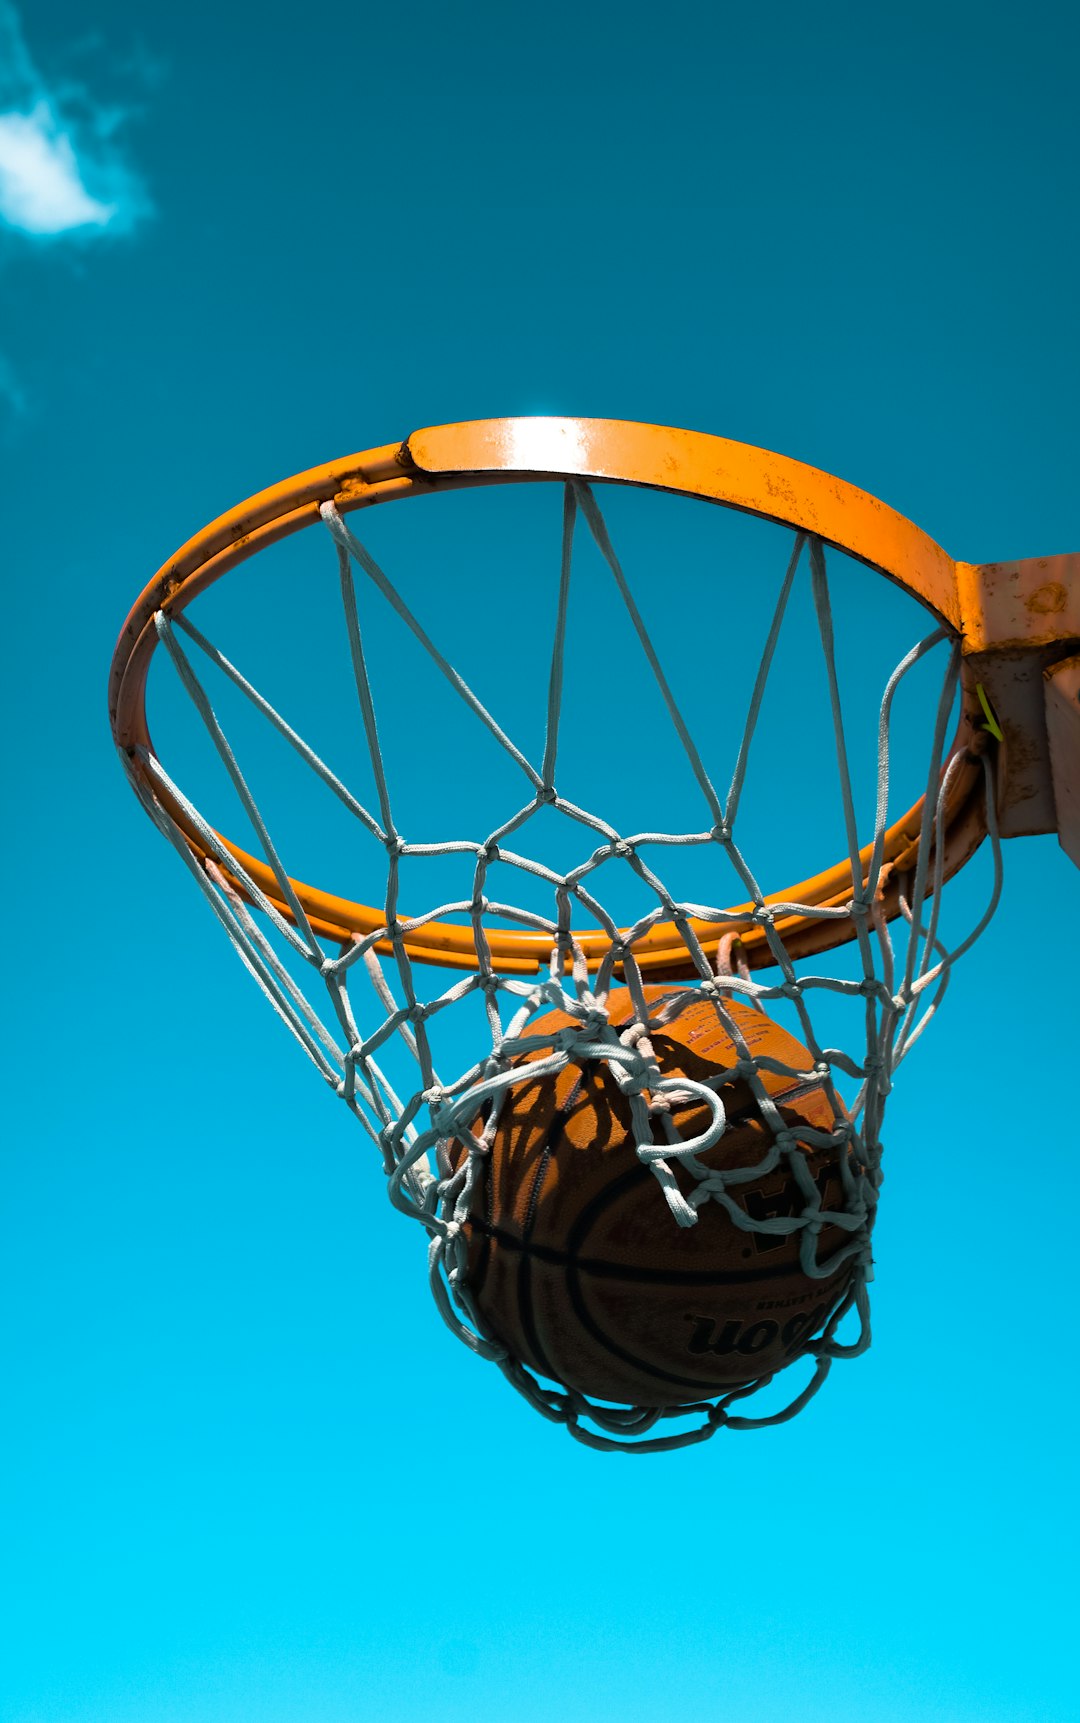 Basketball Net Pictures | Download Free Images on Unsplash